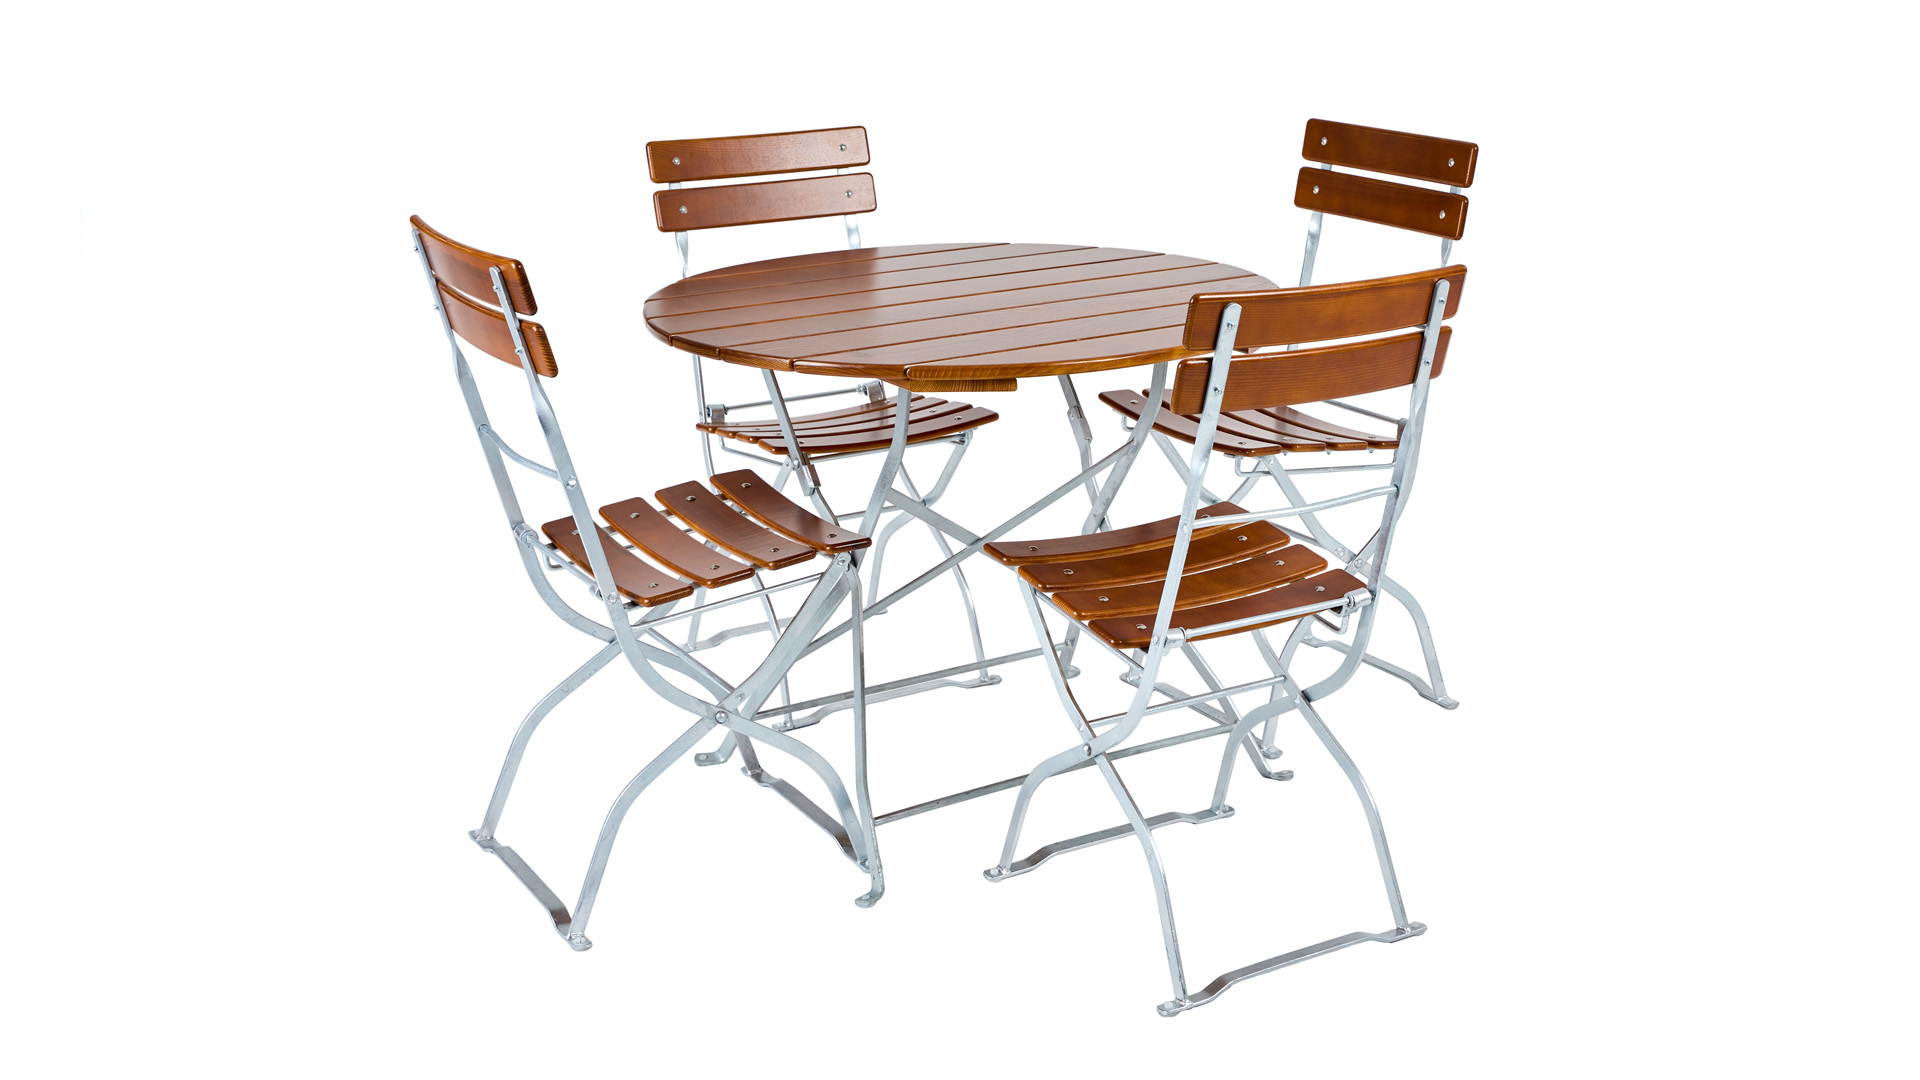 The round beer garden table is represented with four beer garden chairs.